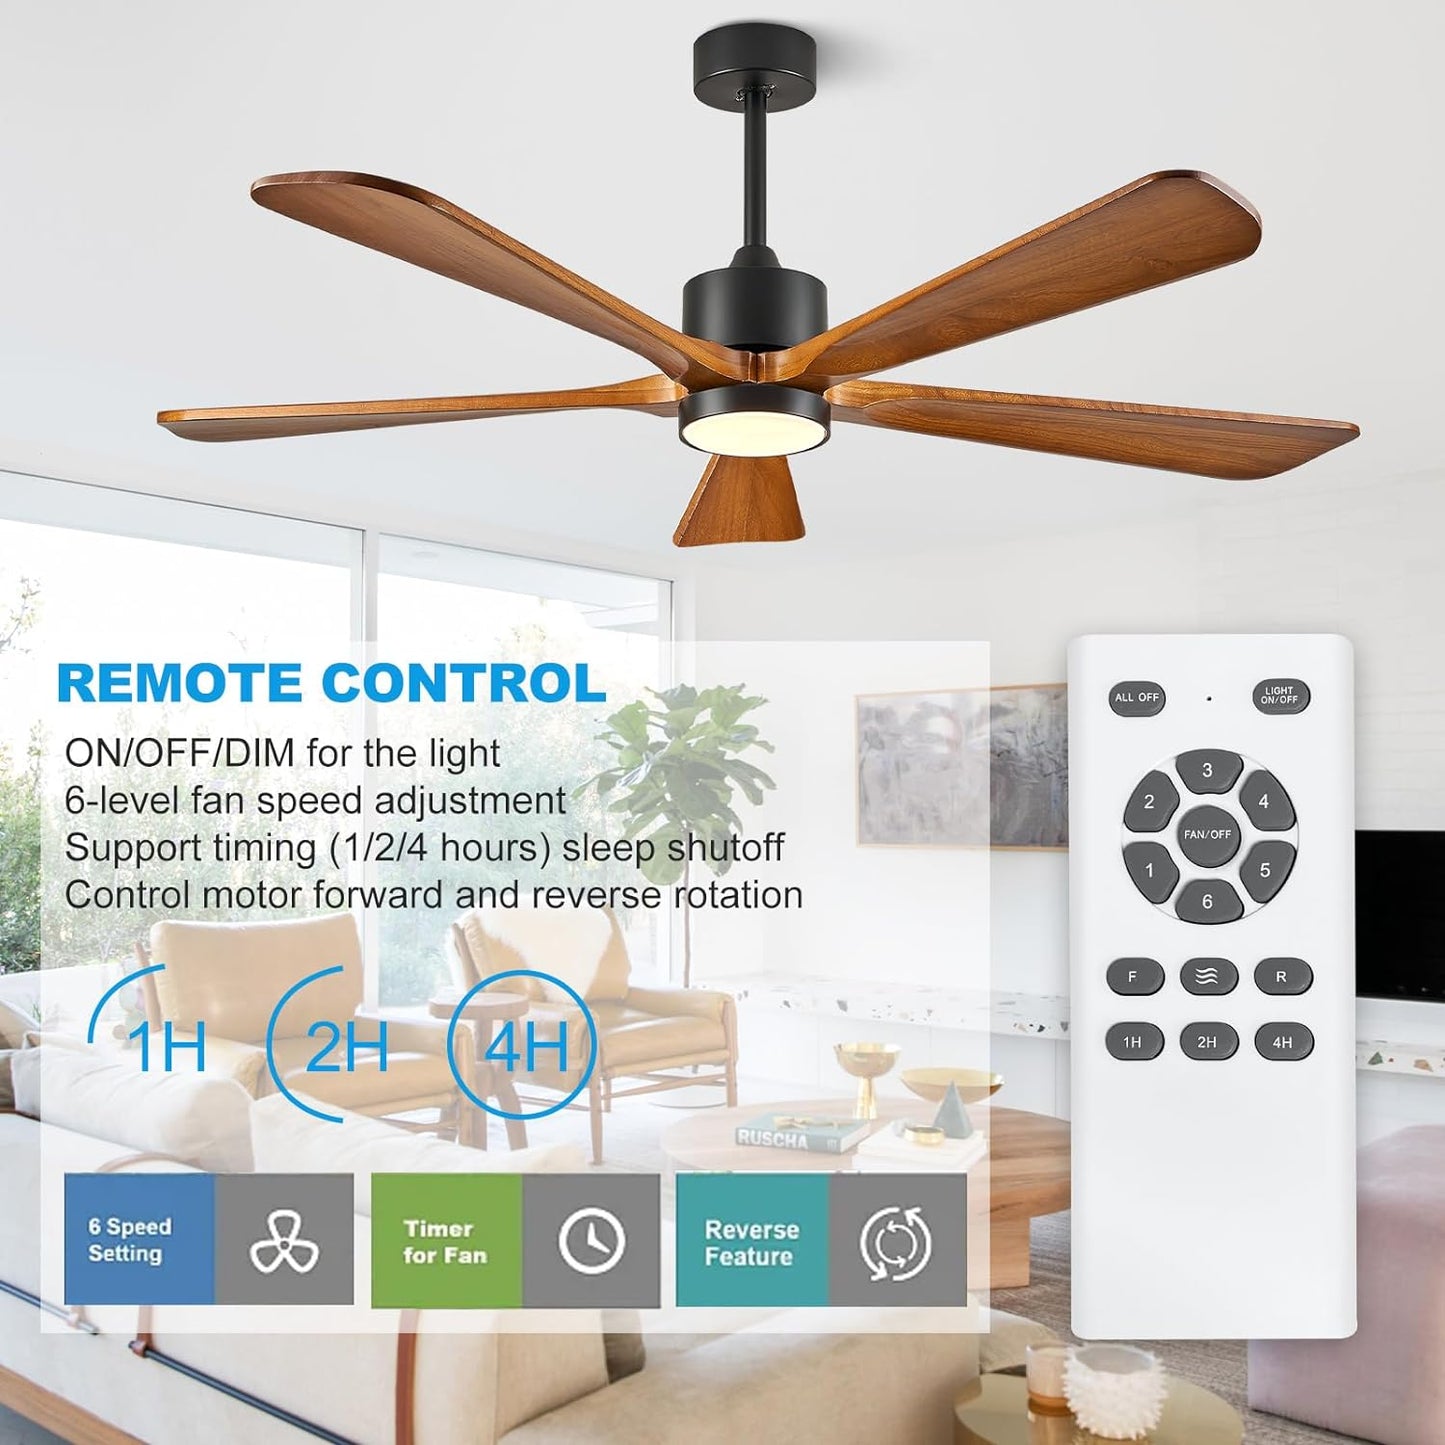 BOOSANT 52' Modern Ceiling Fan with Lights and Remote Control, 5 Solid Wood Blades 6-Speed Noiseless Reversible DC Motor, Ceiling Fan for Bedroom, Living Room-Yellow Walnut